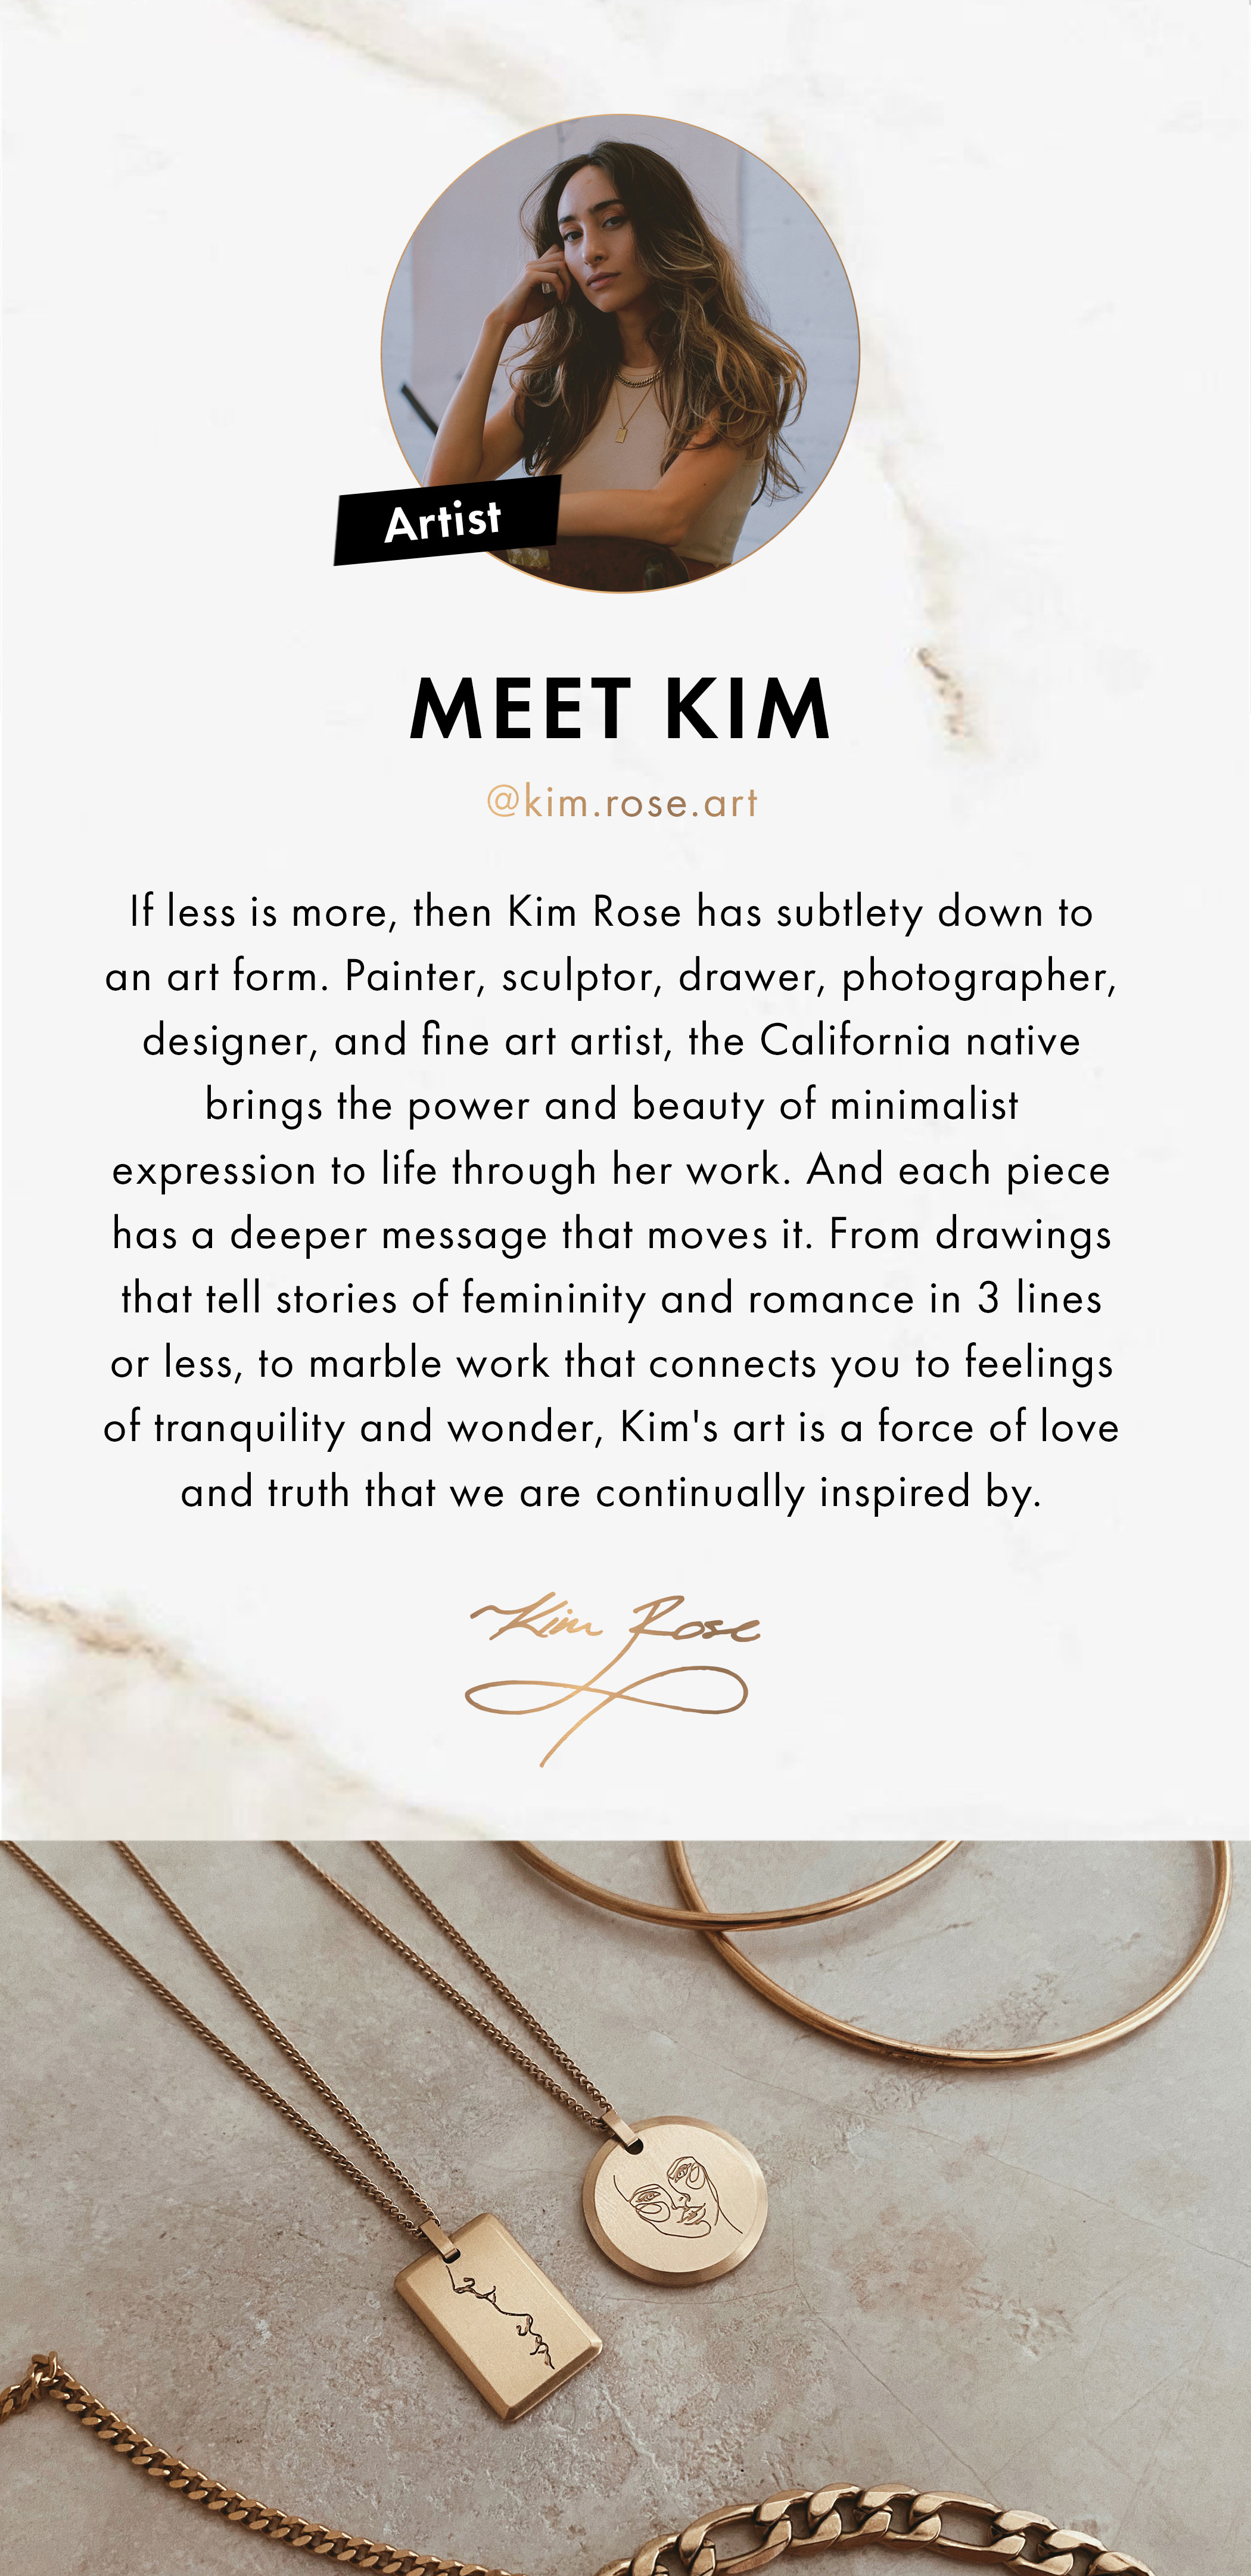 Artist: Meet Kim @kim.rose.art. If less is more, then Kim Rose has subtlety down to an art form. Painter, sculptor, drawer, photographer, designer, and fine art artist, the California native brings the power and eauty of minimalist expression to life through her work. And each piece has a deeper message that moves it. From drawings that tell stories of femininity and romance in 3 lines or less, to marble work that connects you to feelings of tranquility and wonder, Kim's art is a force of love and truth that we are continually inspired by.